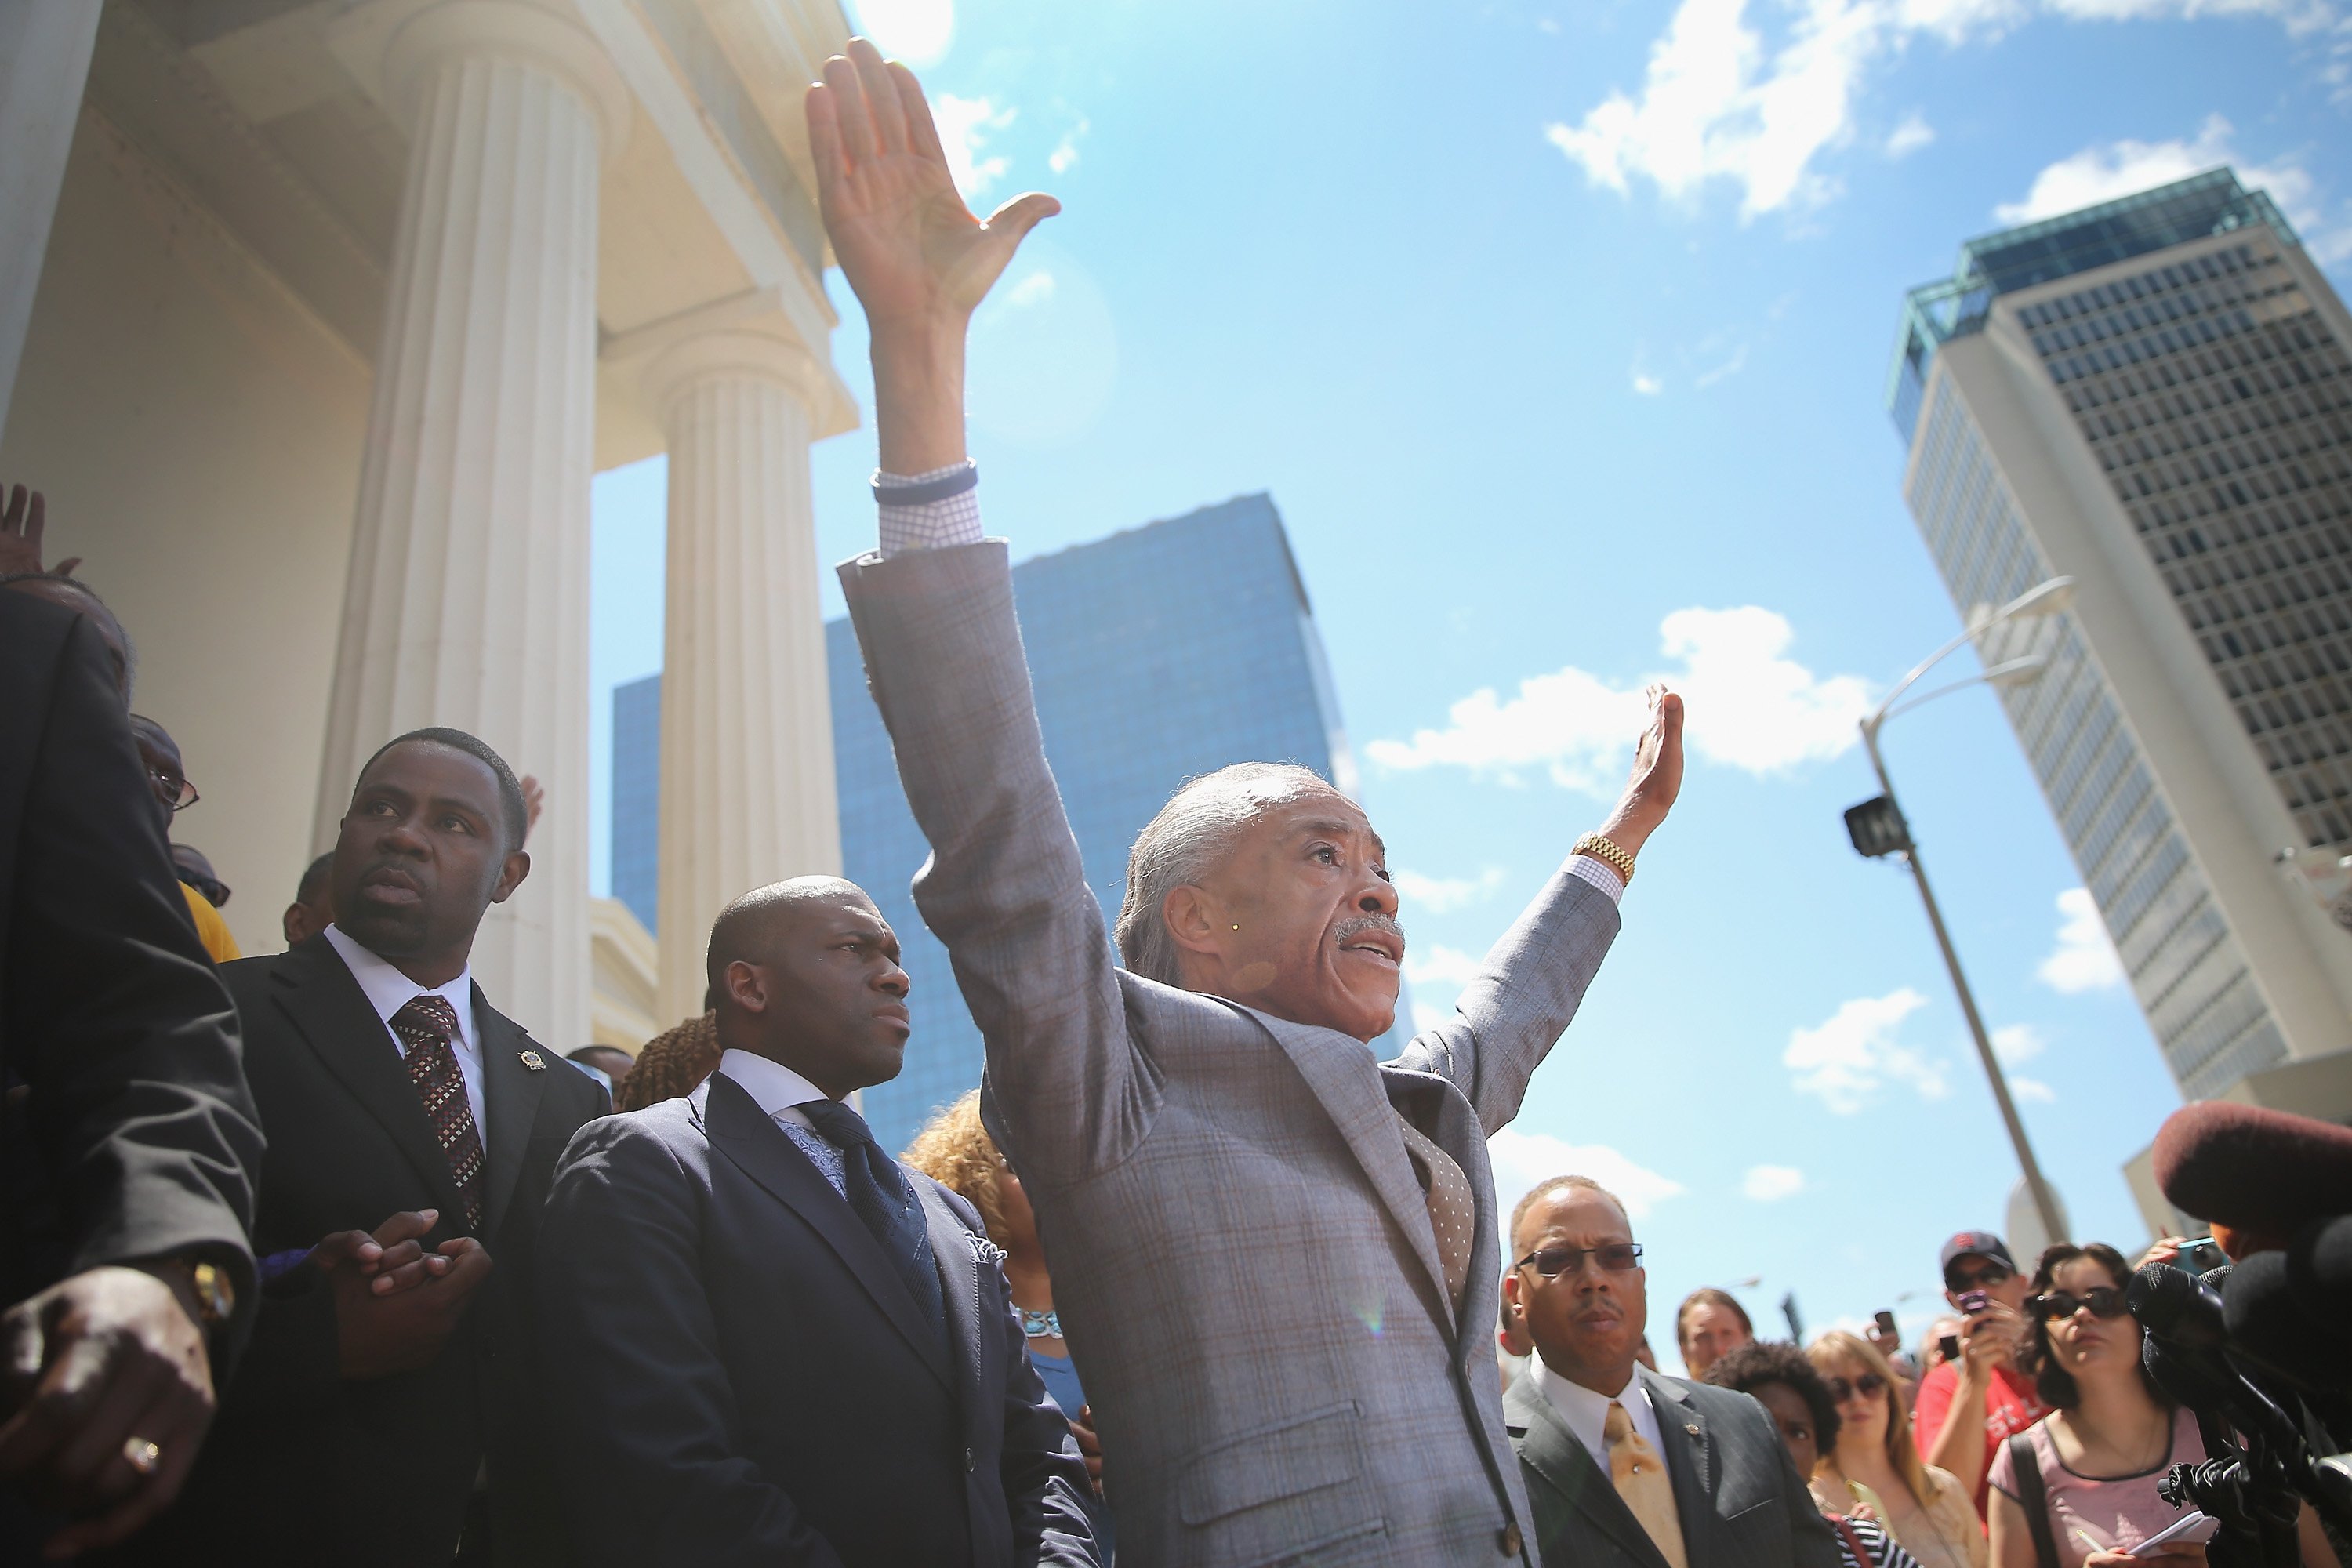 Civil rights leader Rev. Al Sharpton speaks about the killing of teenager Michael Brown at a press conference held on the steps of the old courthouse in St. Louis on Aug. 12, 2014.